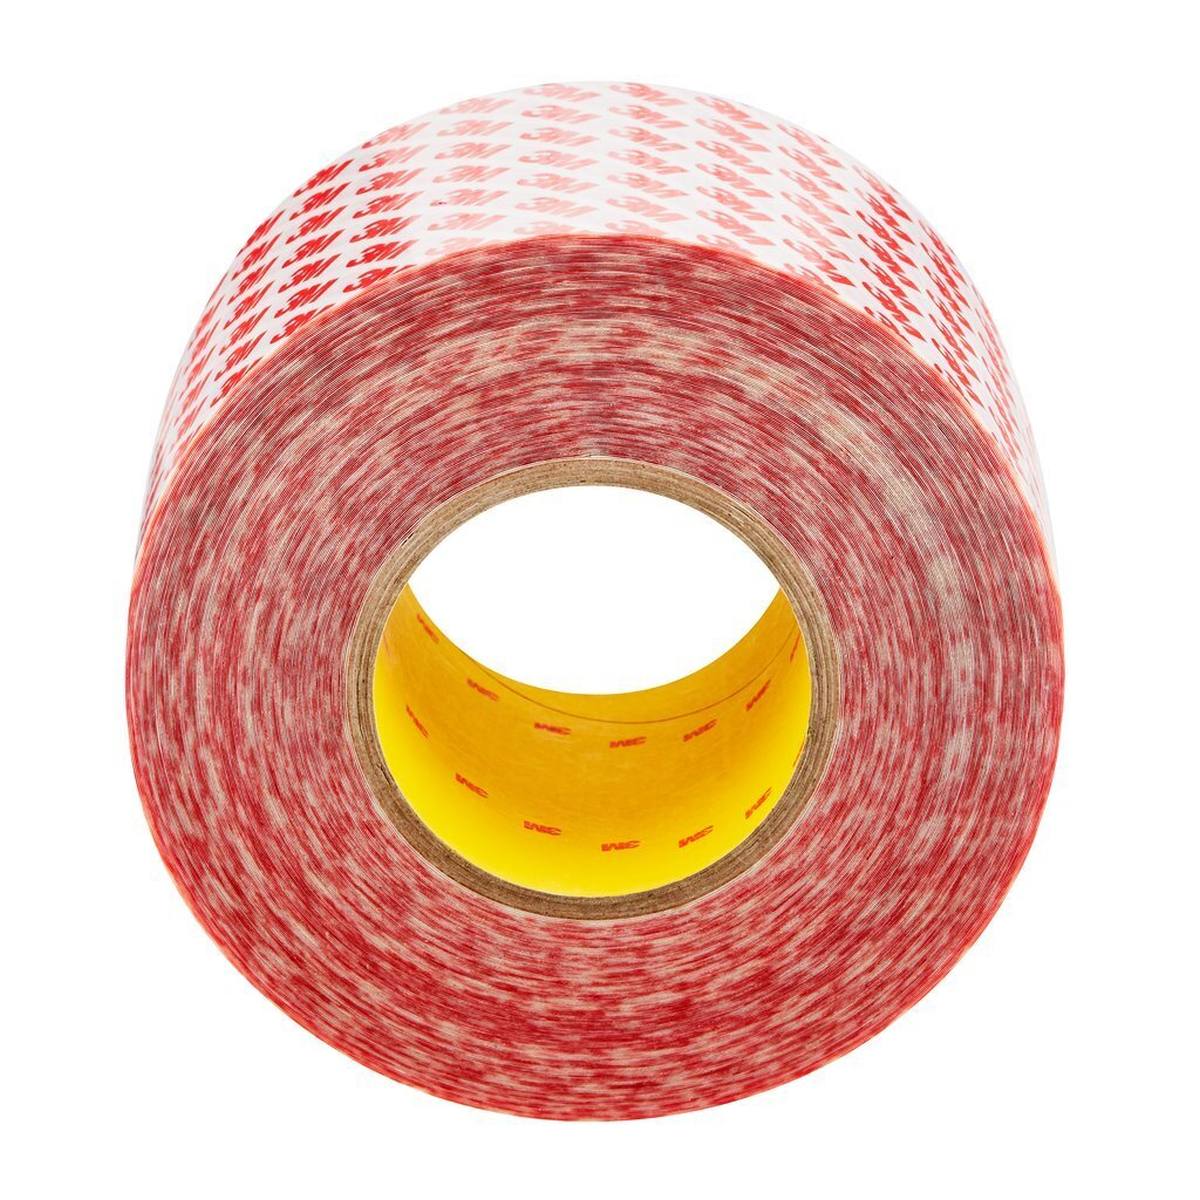 3M Double-sided adhesive tape with polyester backing GPT-020F, transparent, 100 mm x 50 m, 0.202 mm